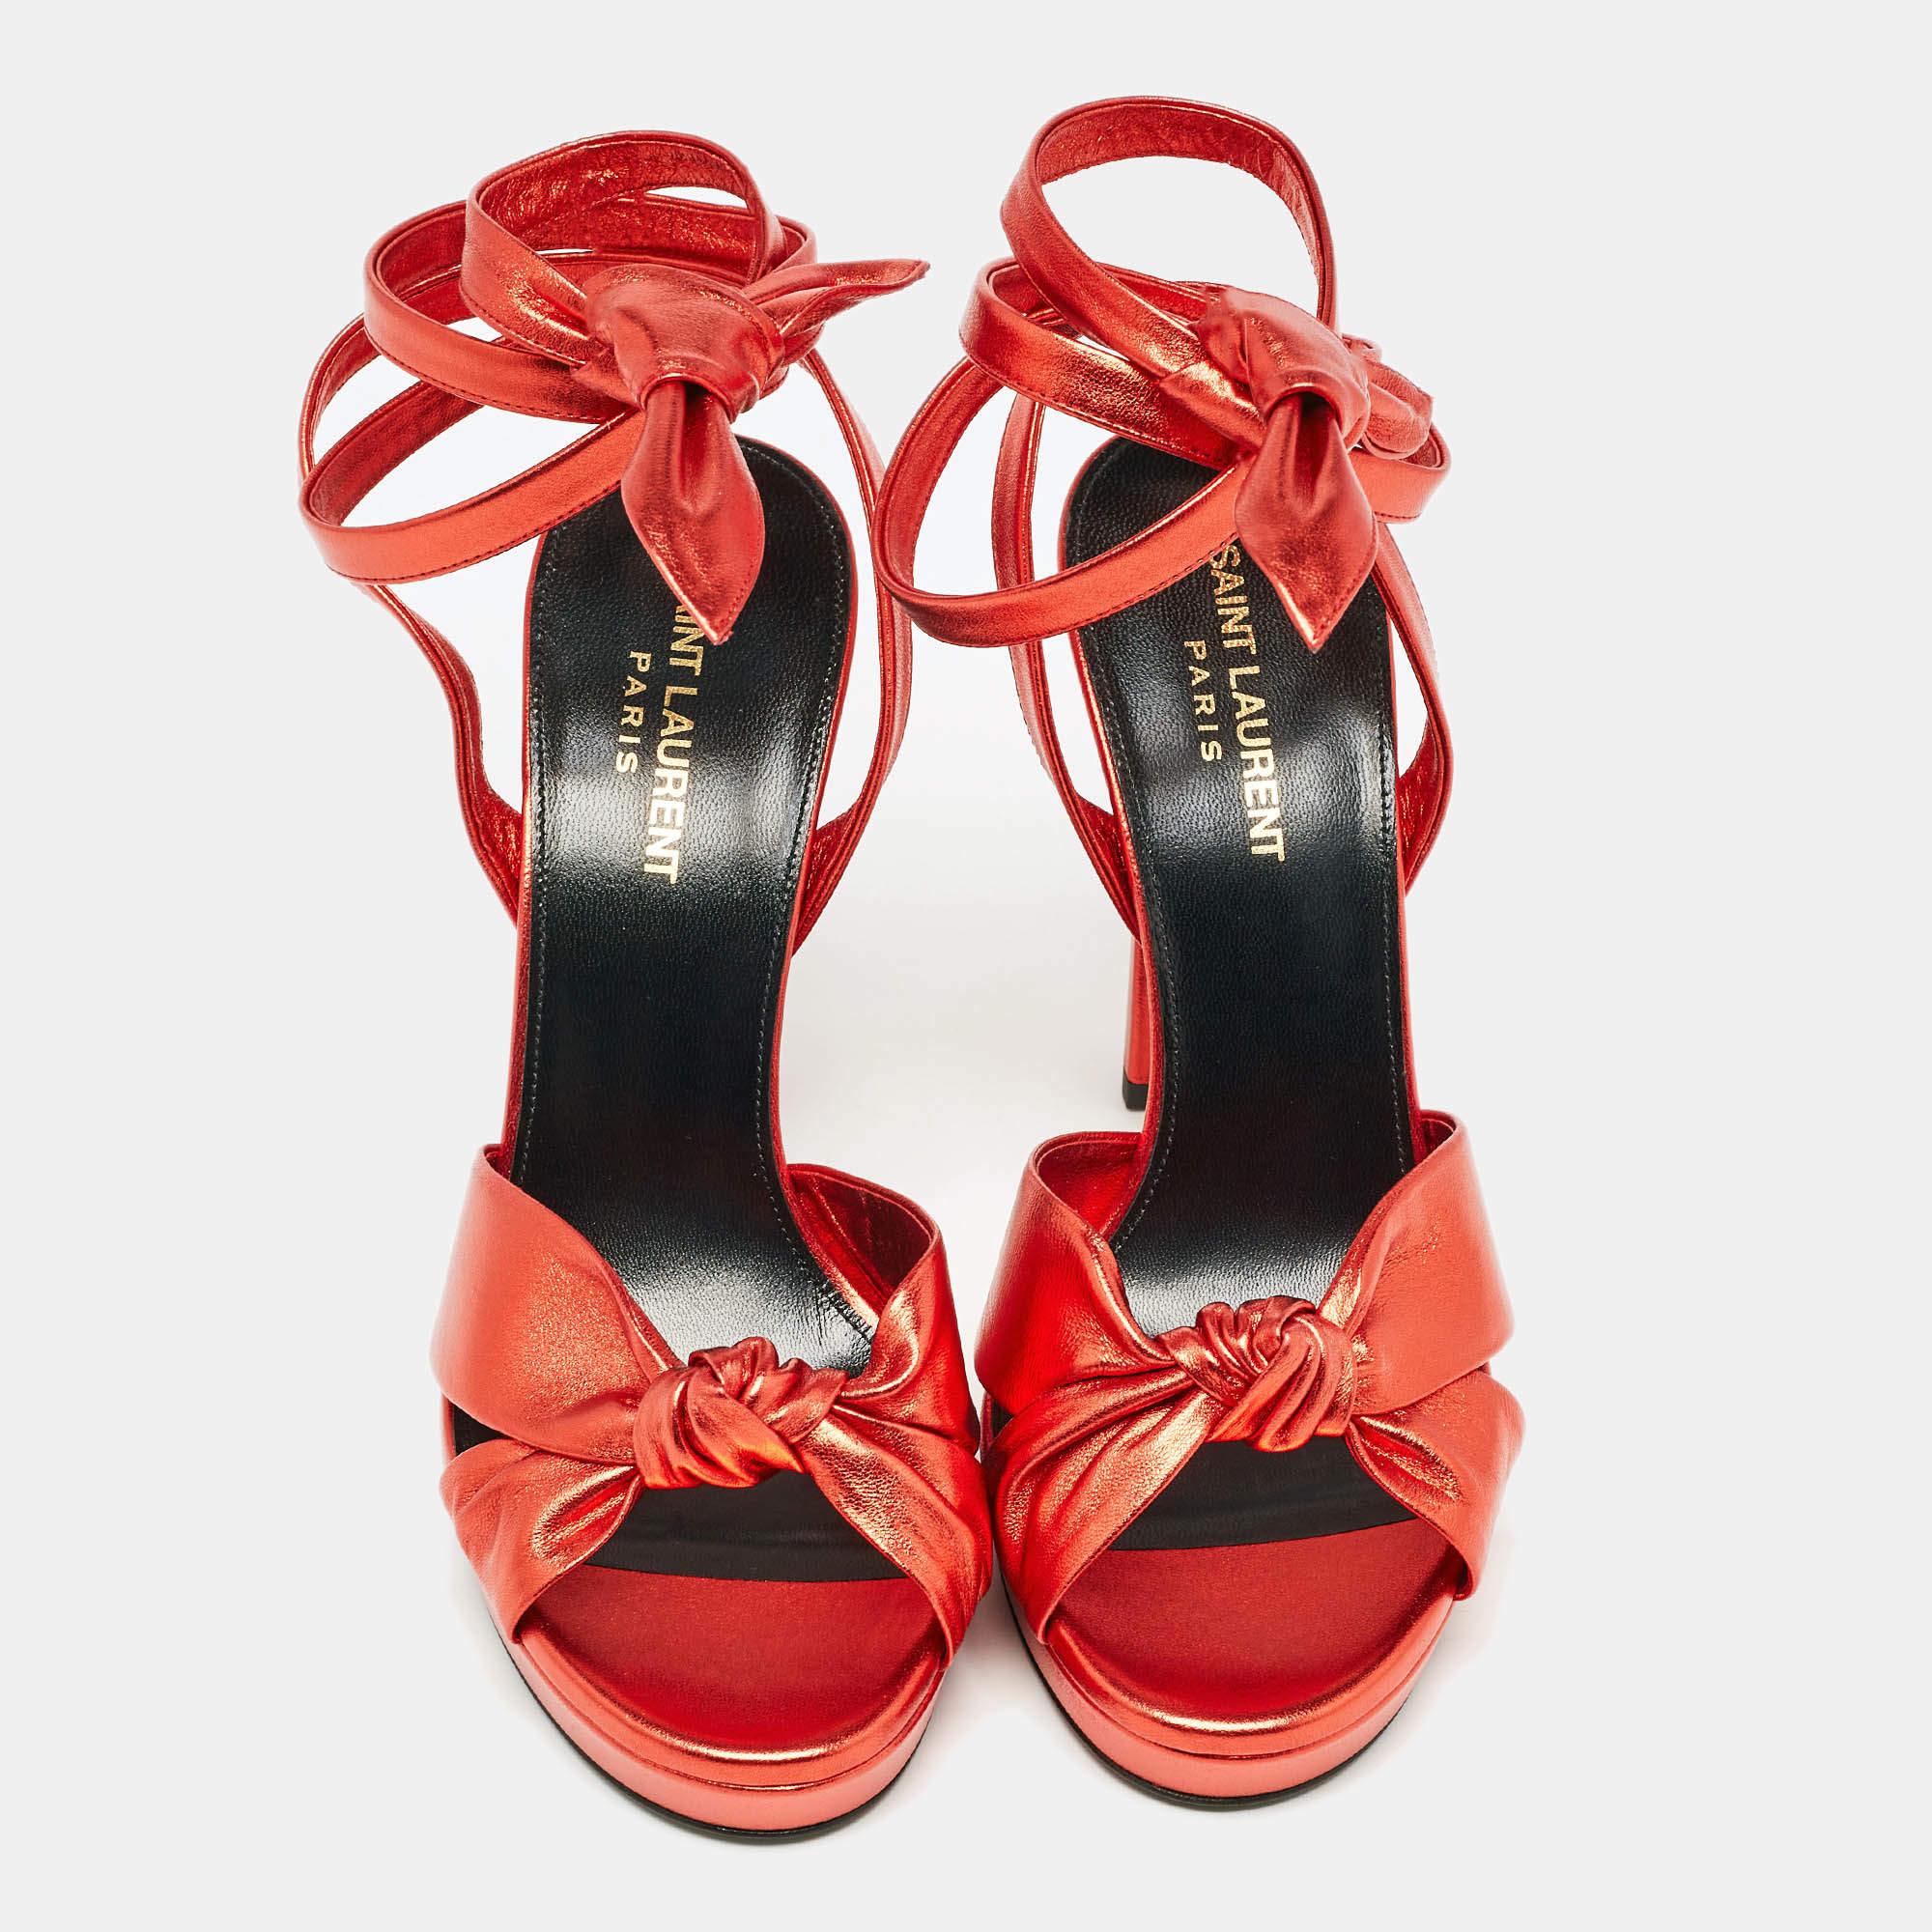 A gorgeous pair of sandals from the house of Yves Saint Laurent to highlight your fabulous styling choices. Crafted from red leather, they feature open toes and come equipped with ankle ties, comfortable leather-lined insoles, and 12 cm